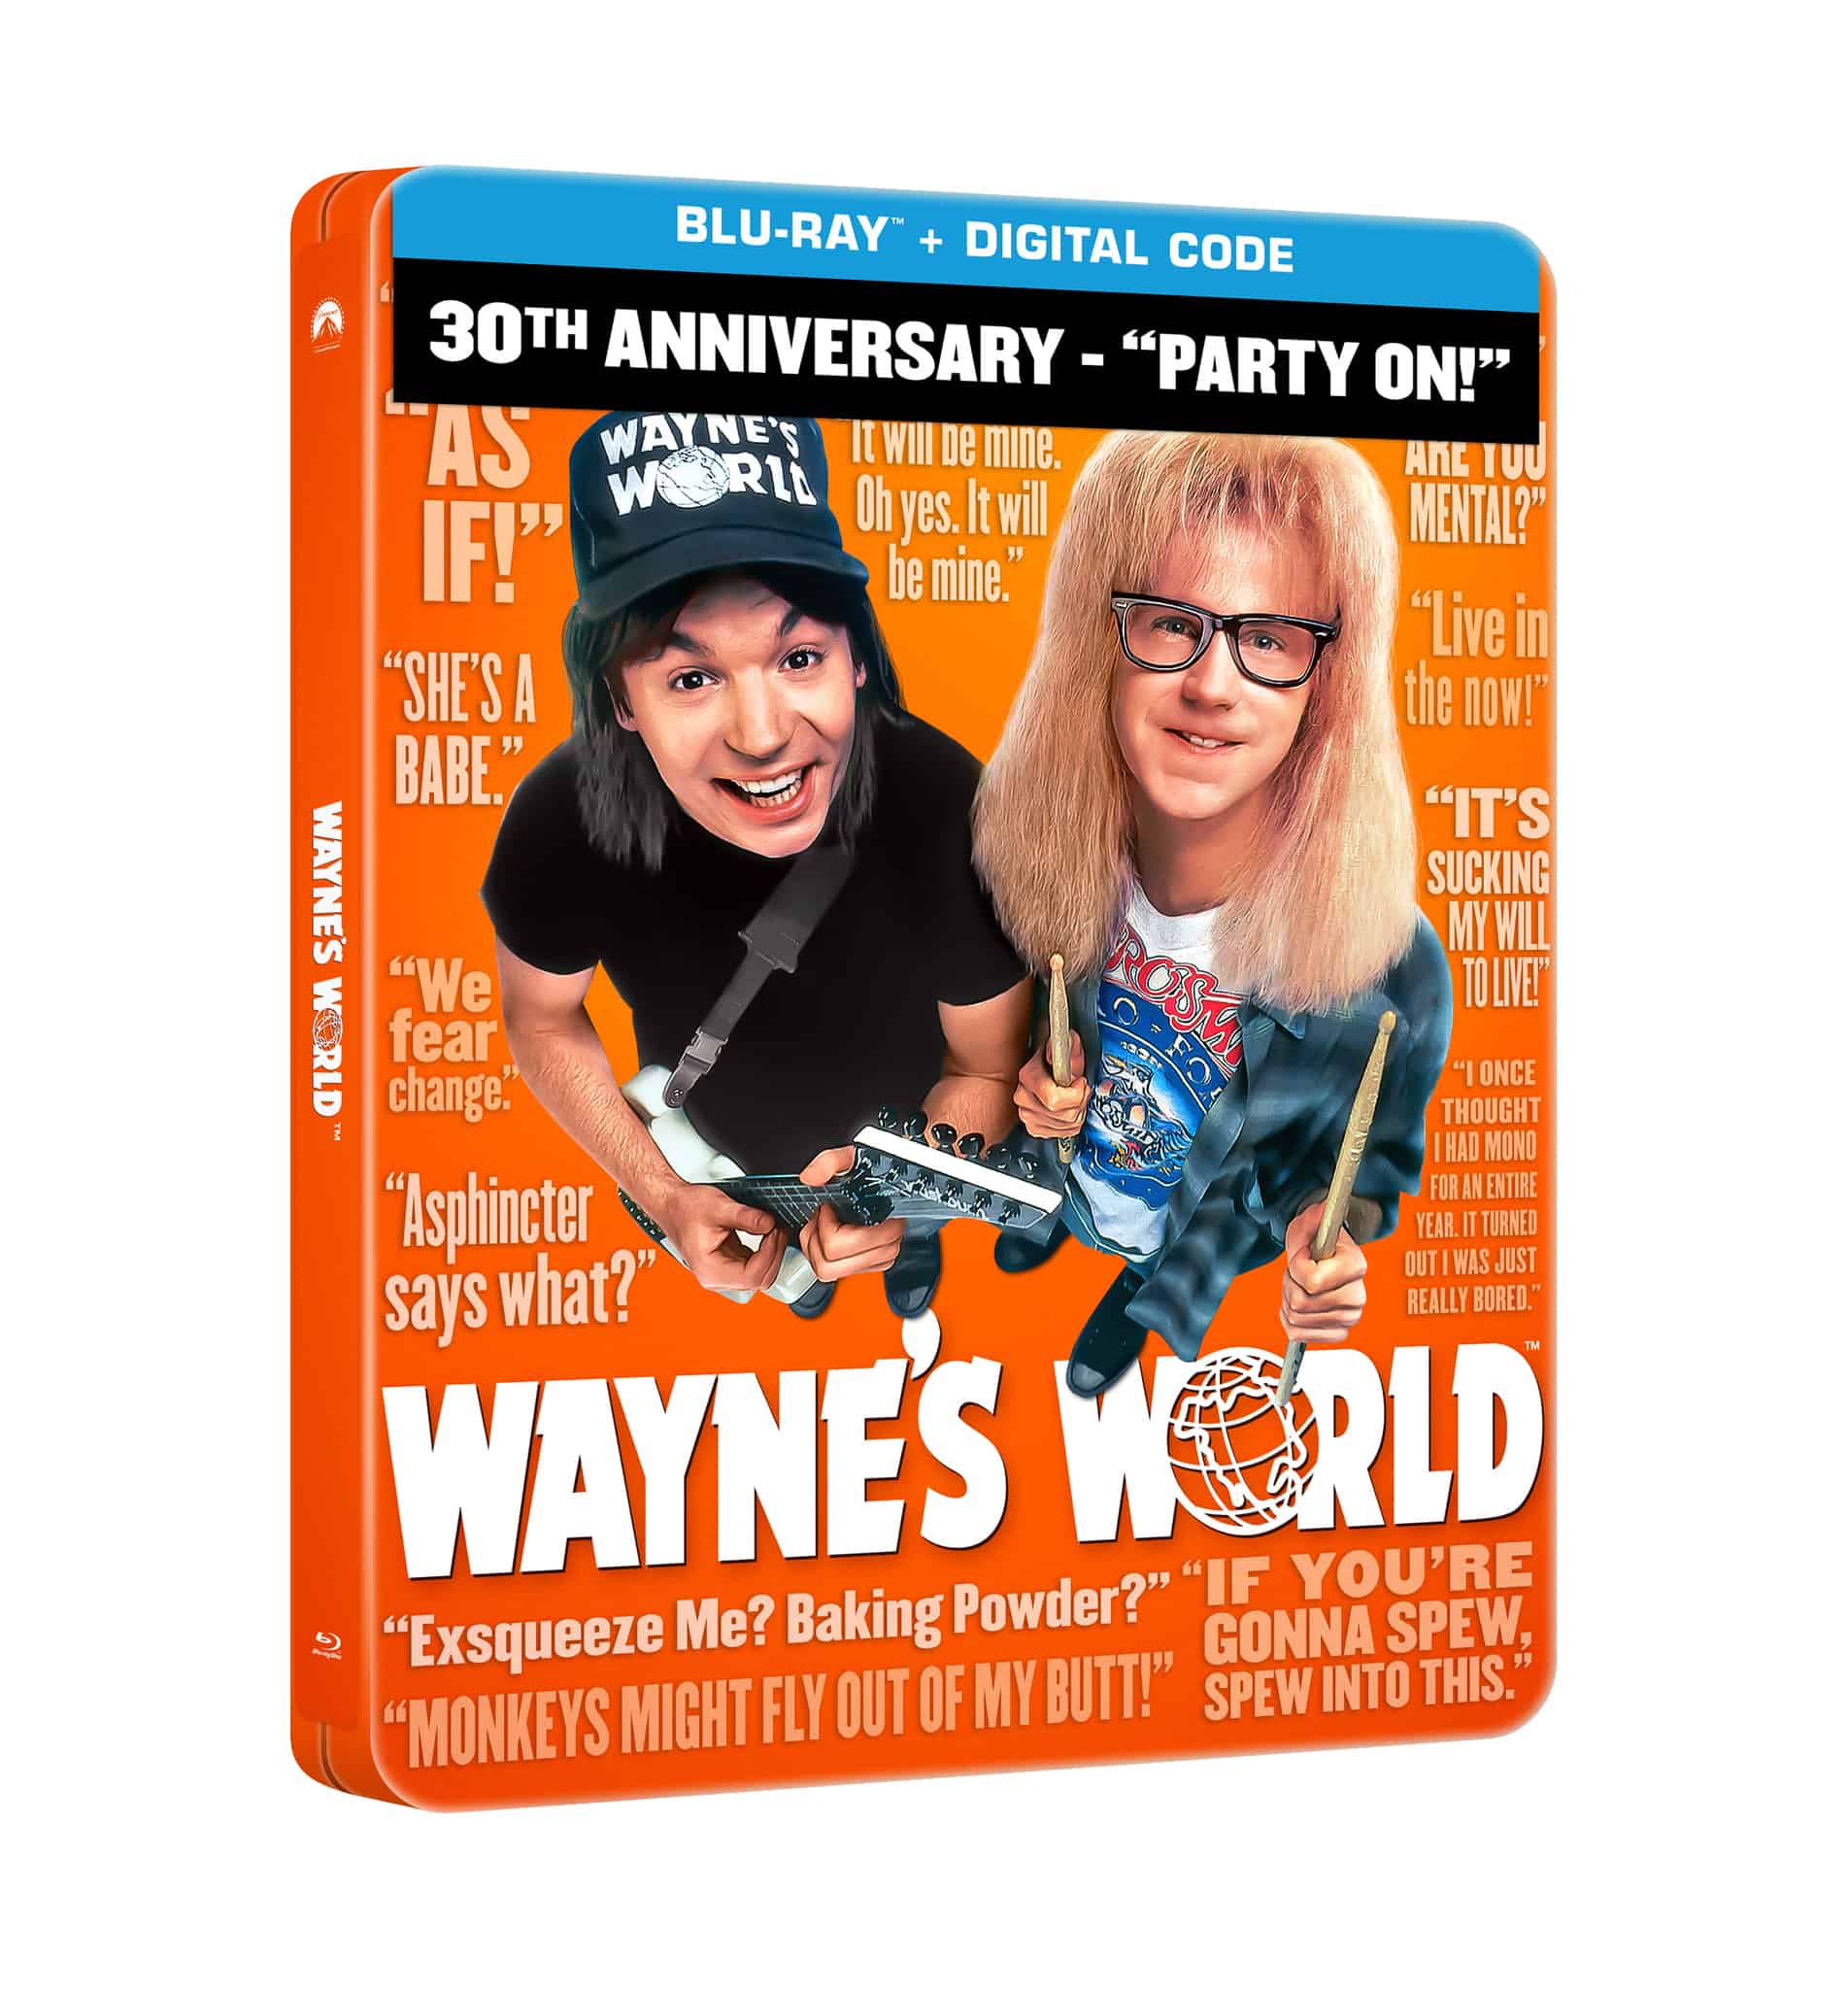 Wayne's World celebrates its 30th anniversary in February with a Steelbook Blu-ray 1